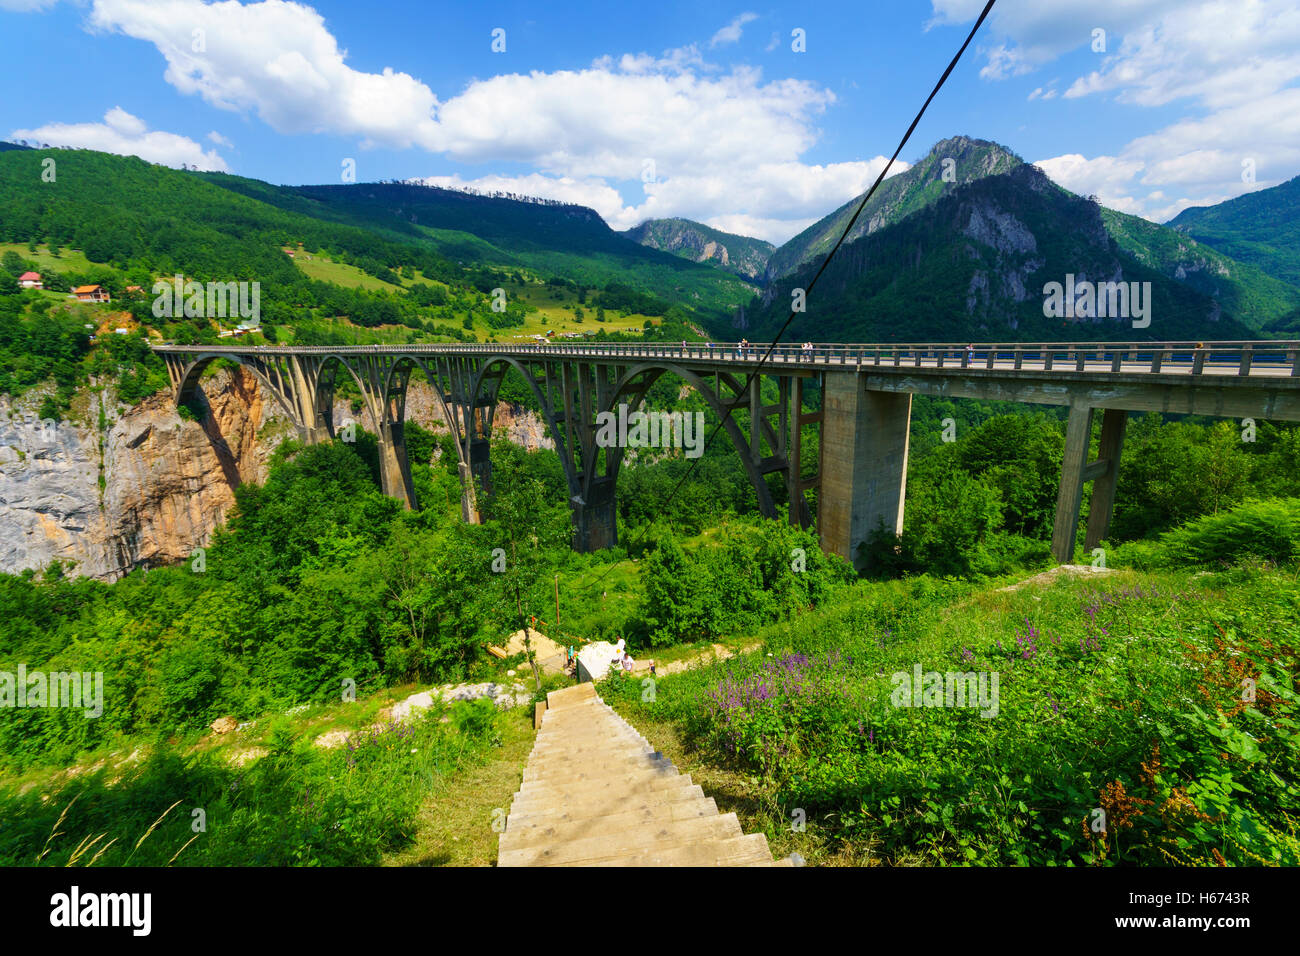 BUDECEVICA, MONTENEGRO - JULY 02, 2015: Scene of the Durdevica Tara Bridge, across the Tara River Canyon, with locals and touris Stock Photo